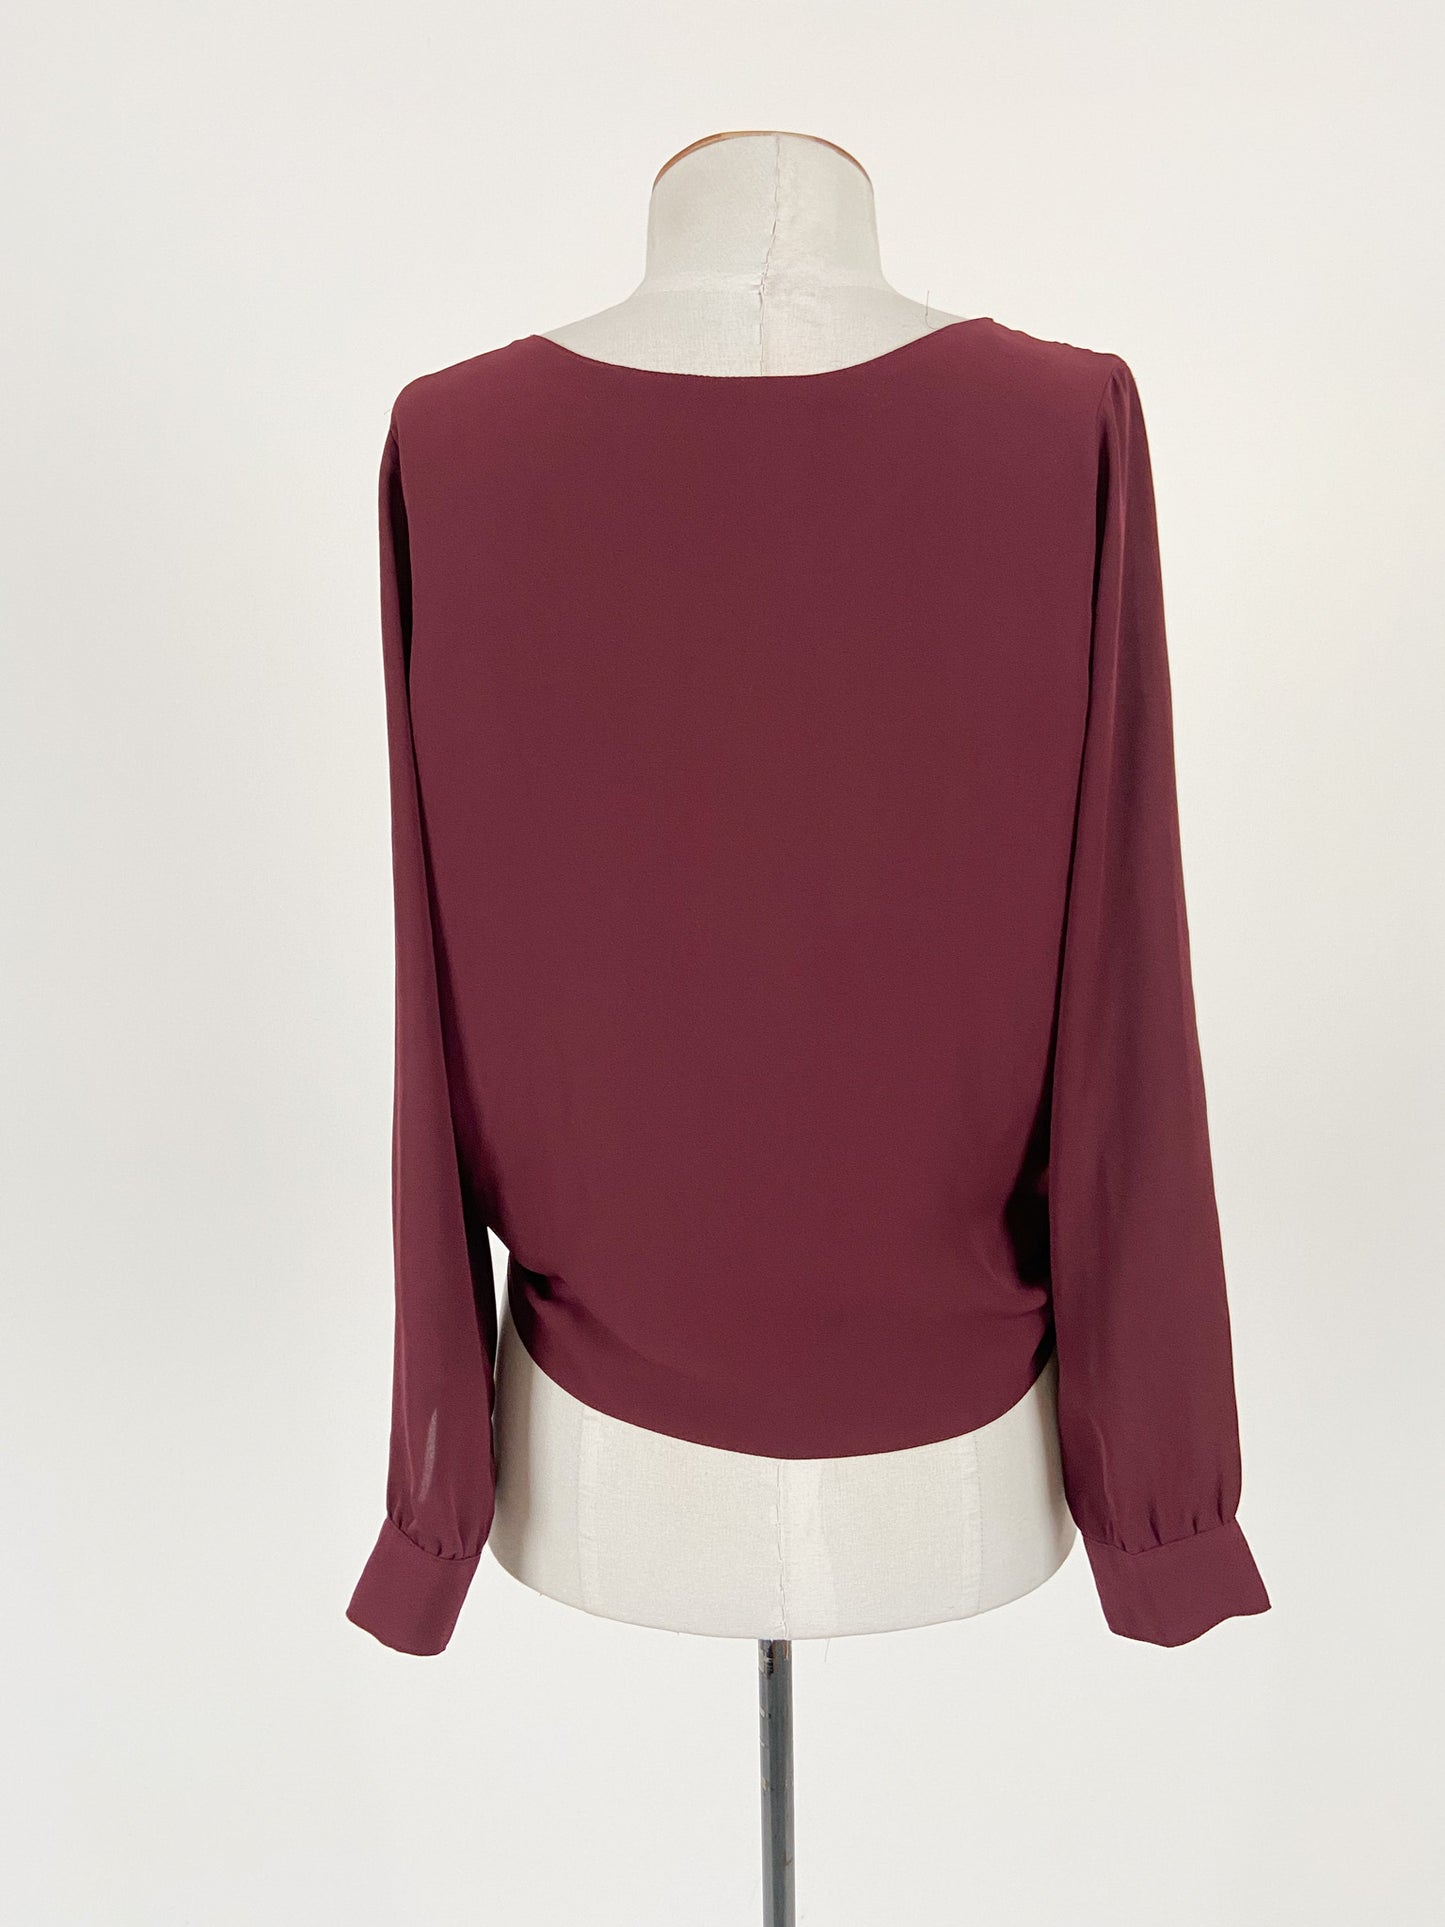 Glassons | Red Casual/Cocktail Top | Size S